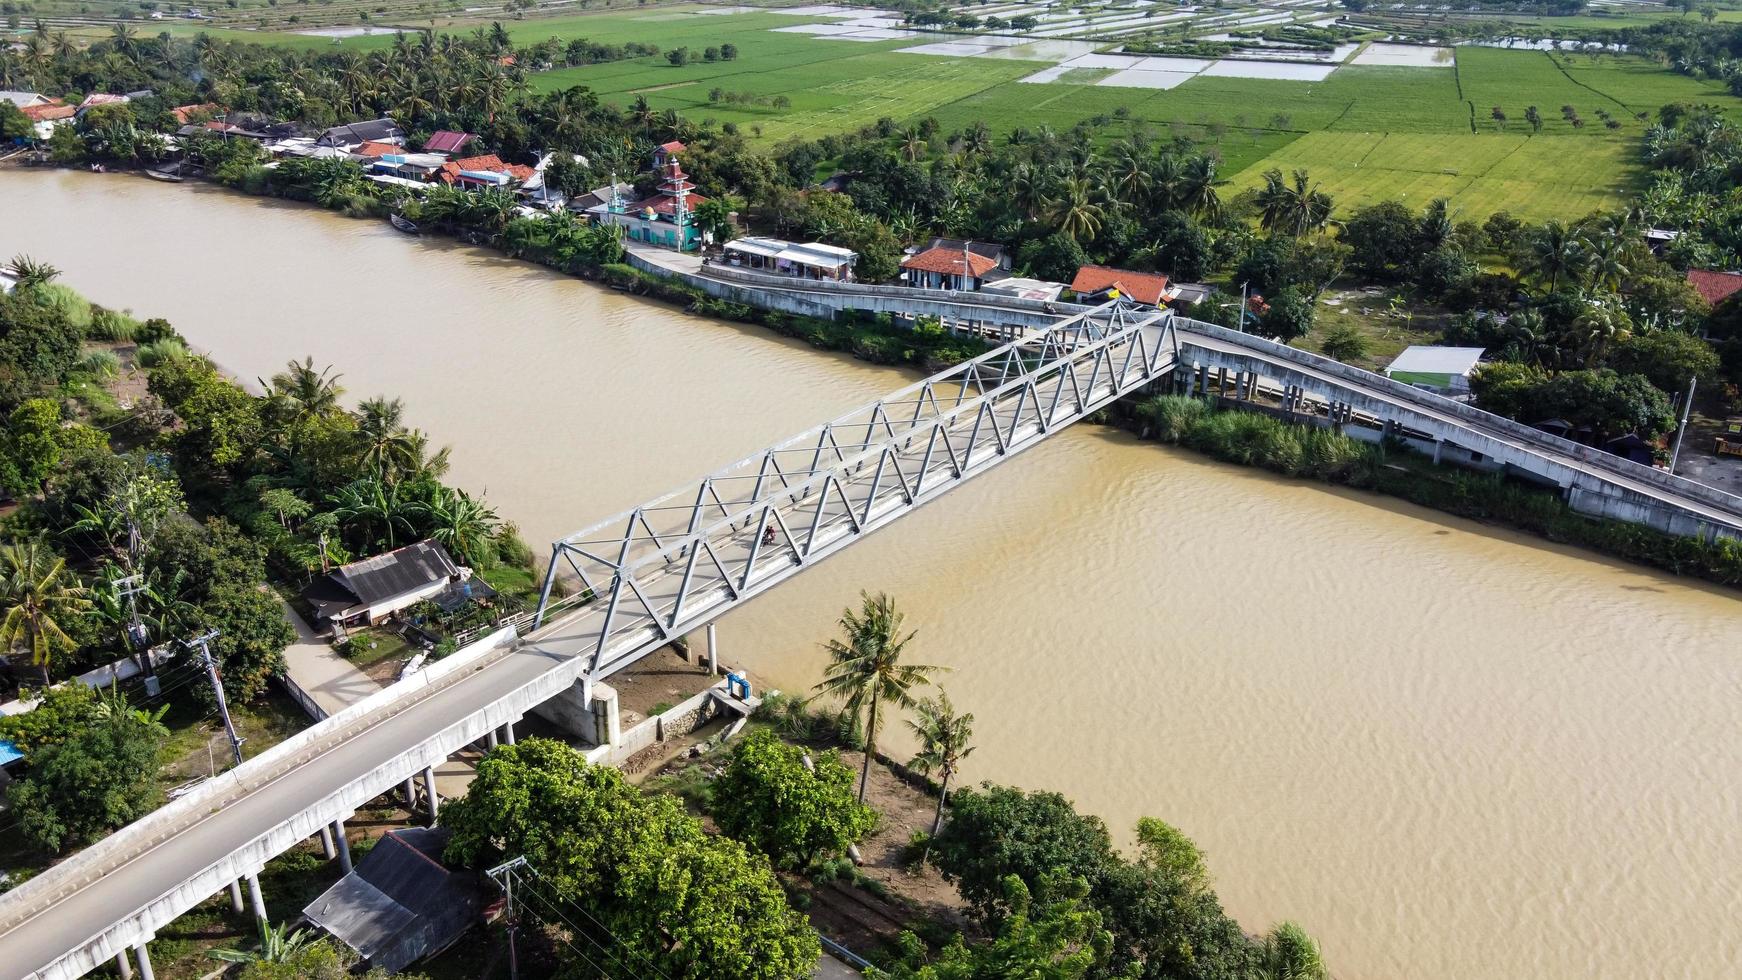 Bekasi, Indonesia 2021- Aerial drone view of a long bridge at the end of the river connecting two villages photo